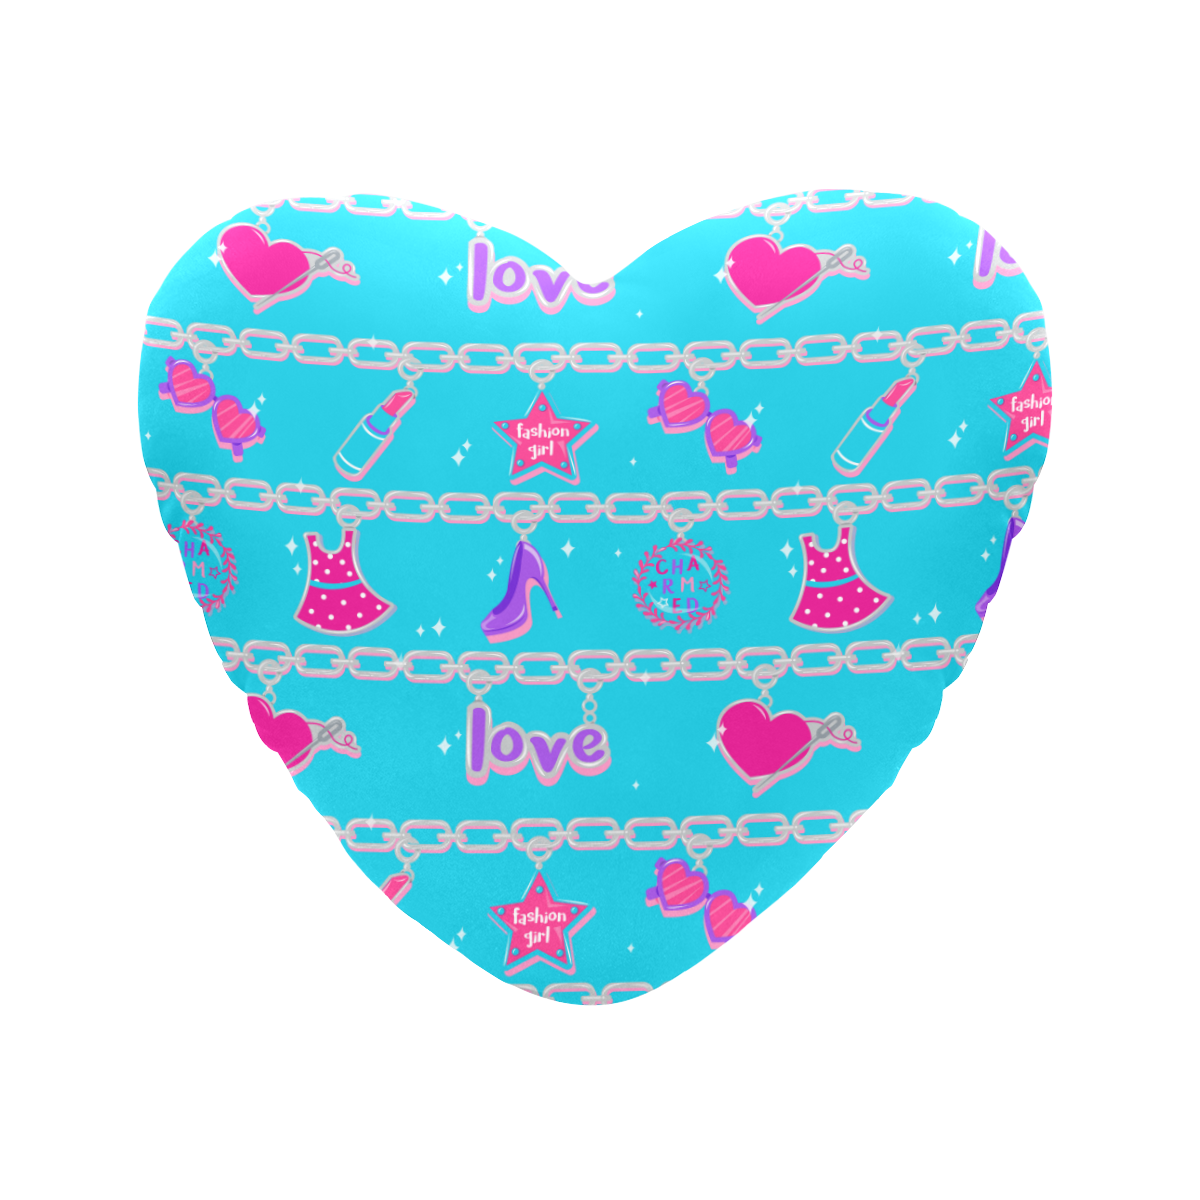 CHARMED HEART SHAPED PILLOW- TEAL